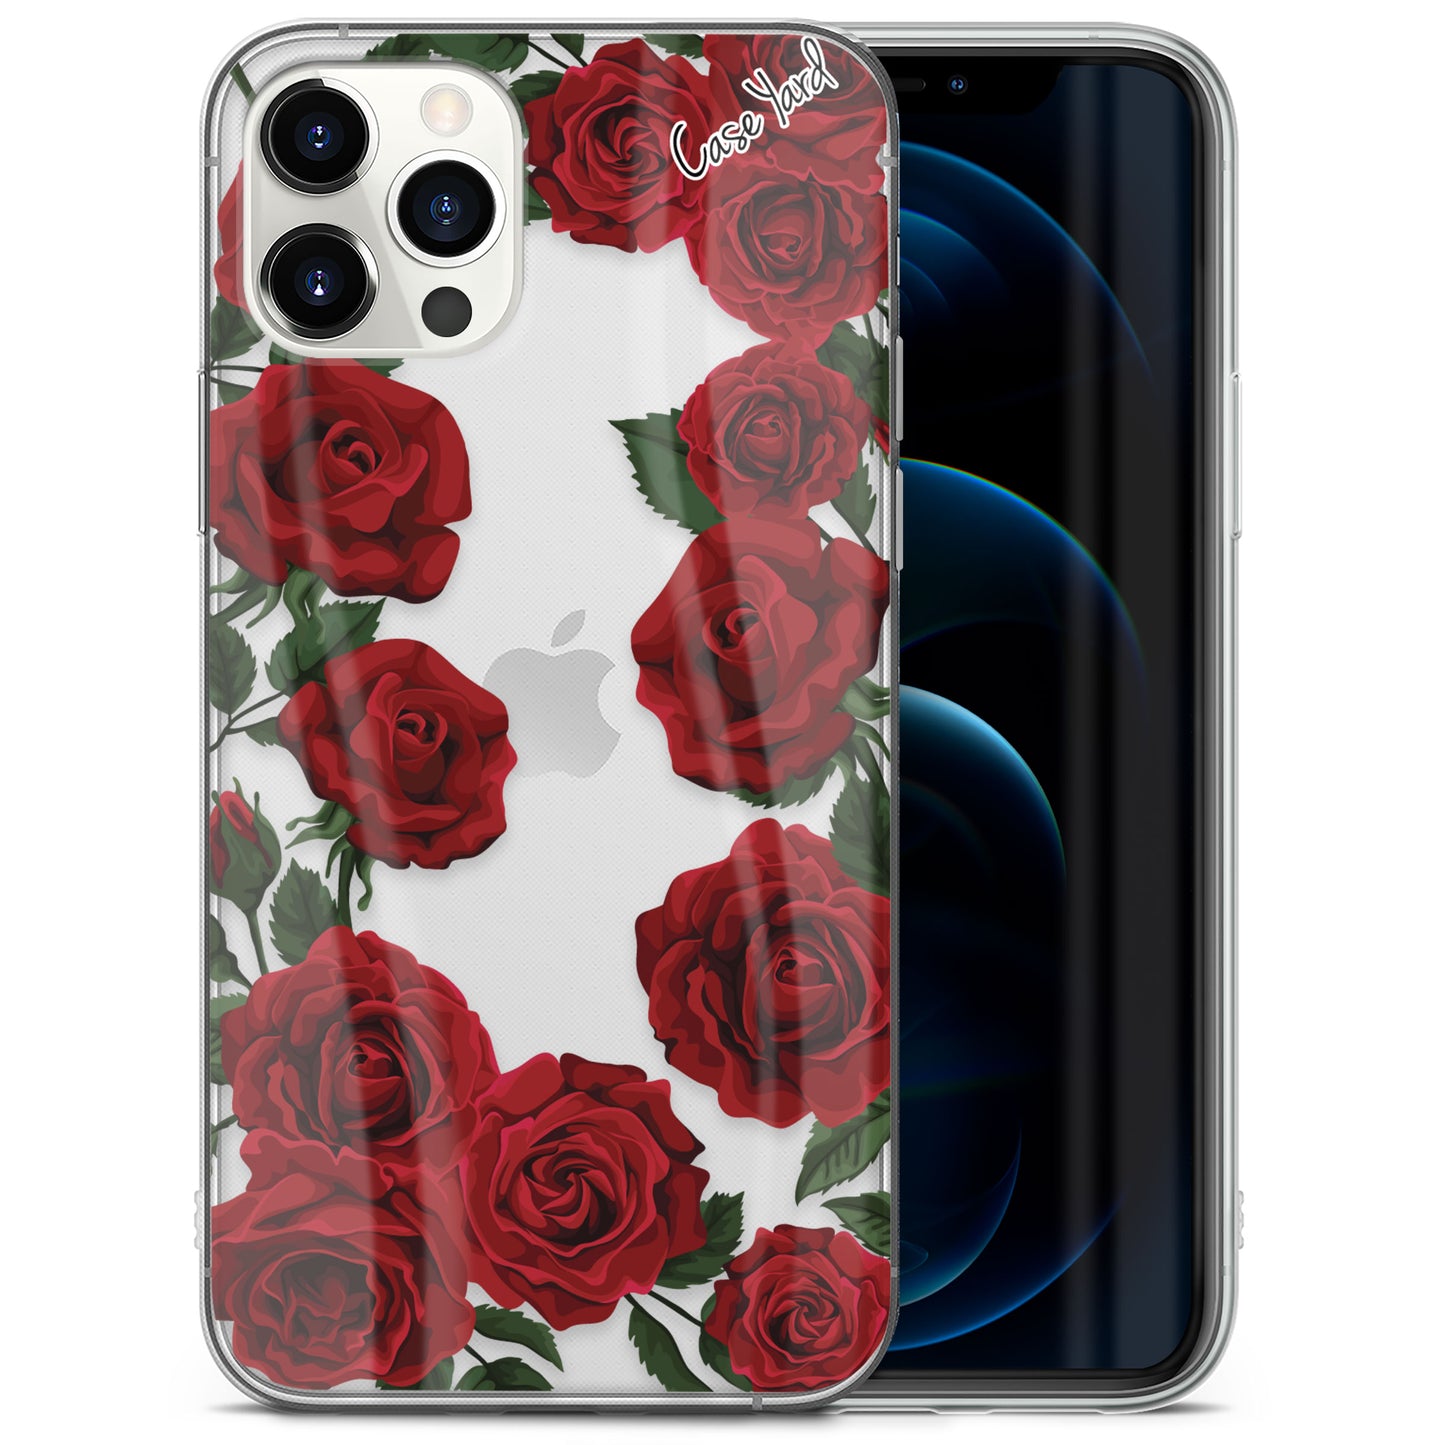 TPU Clear case with (Red Roses) Design for iPhone & Samsung Phones